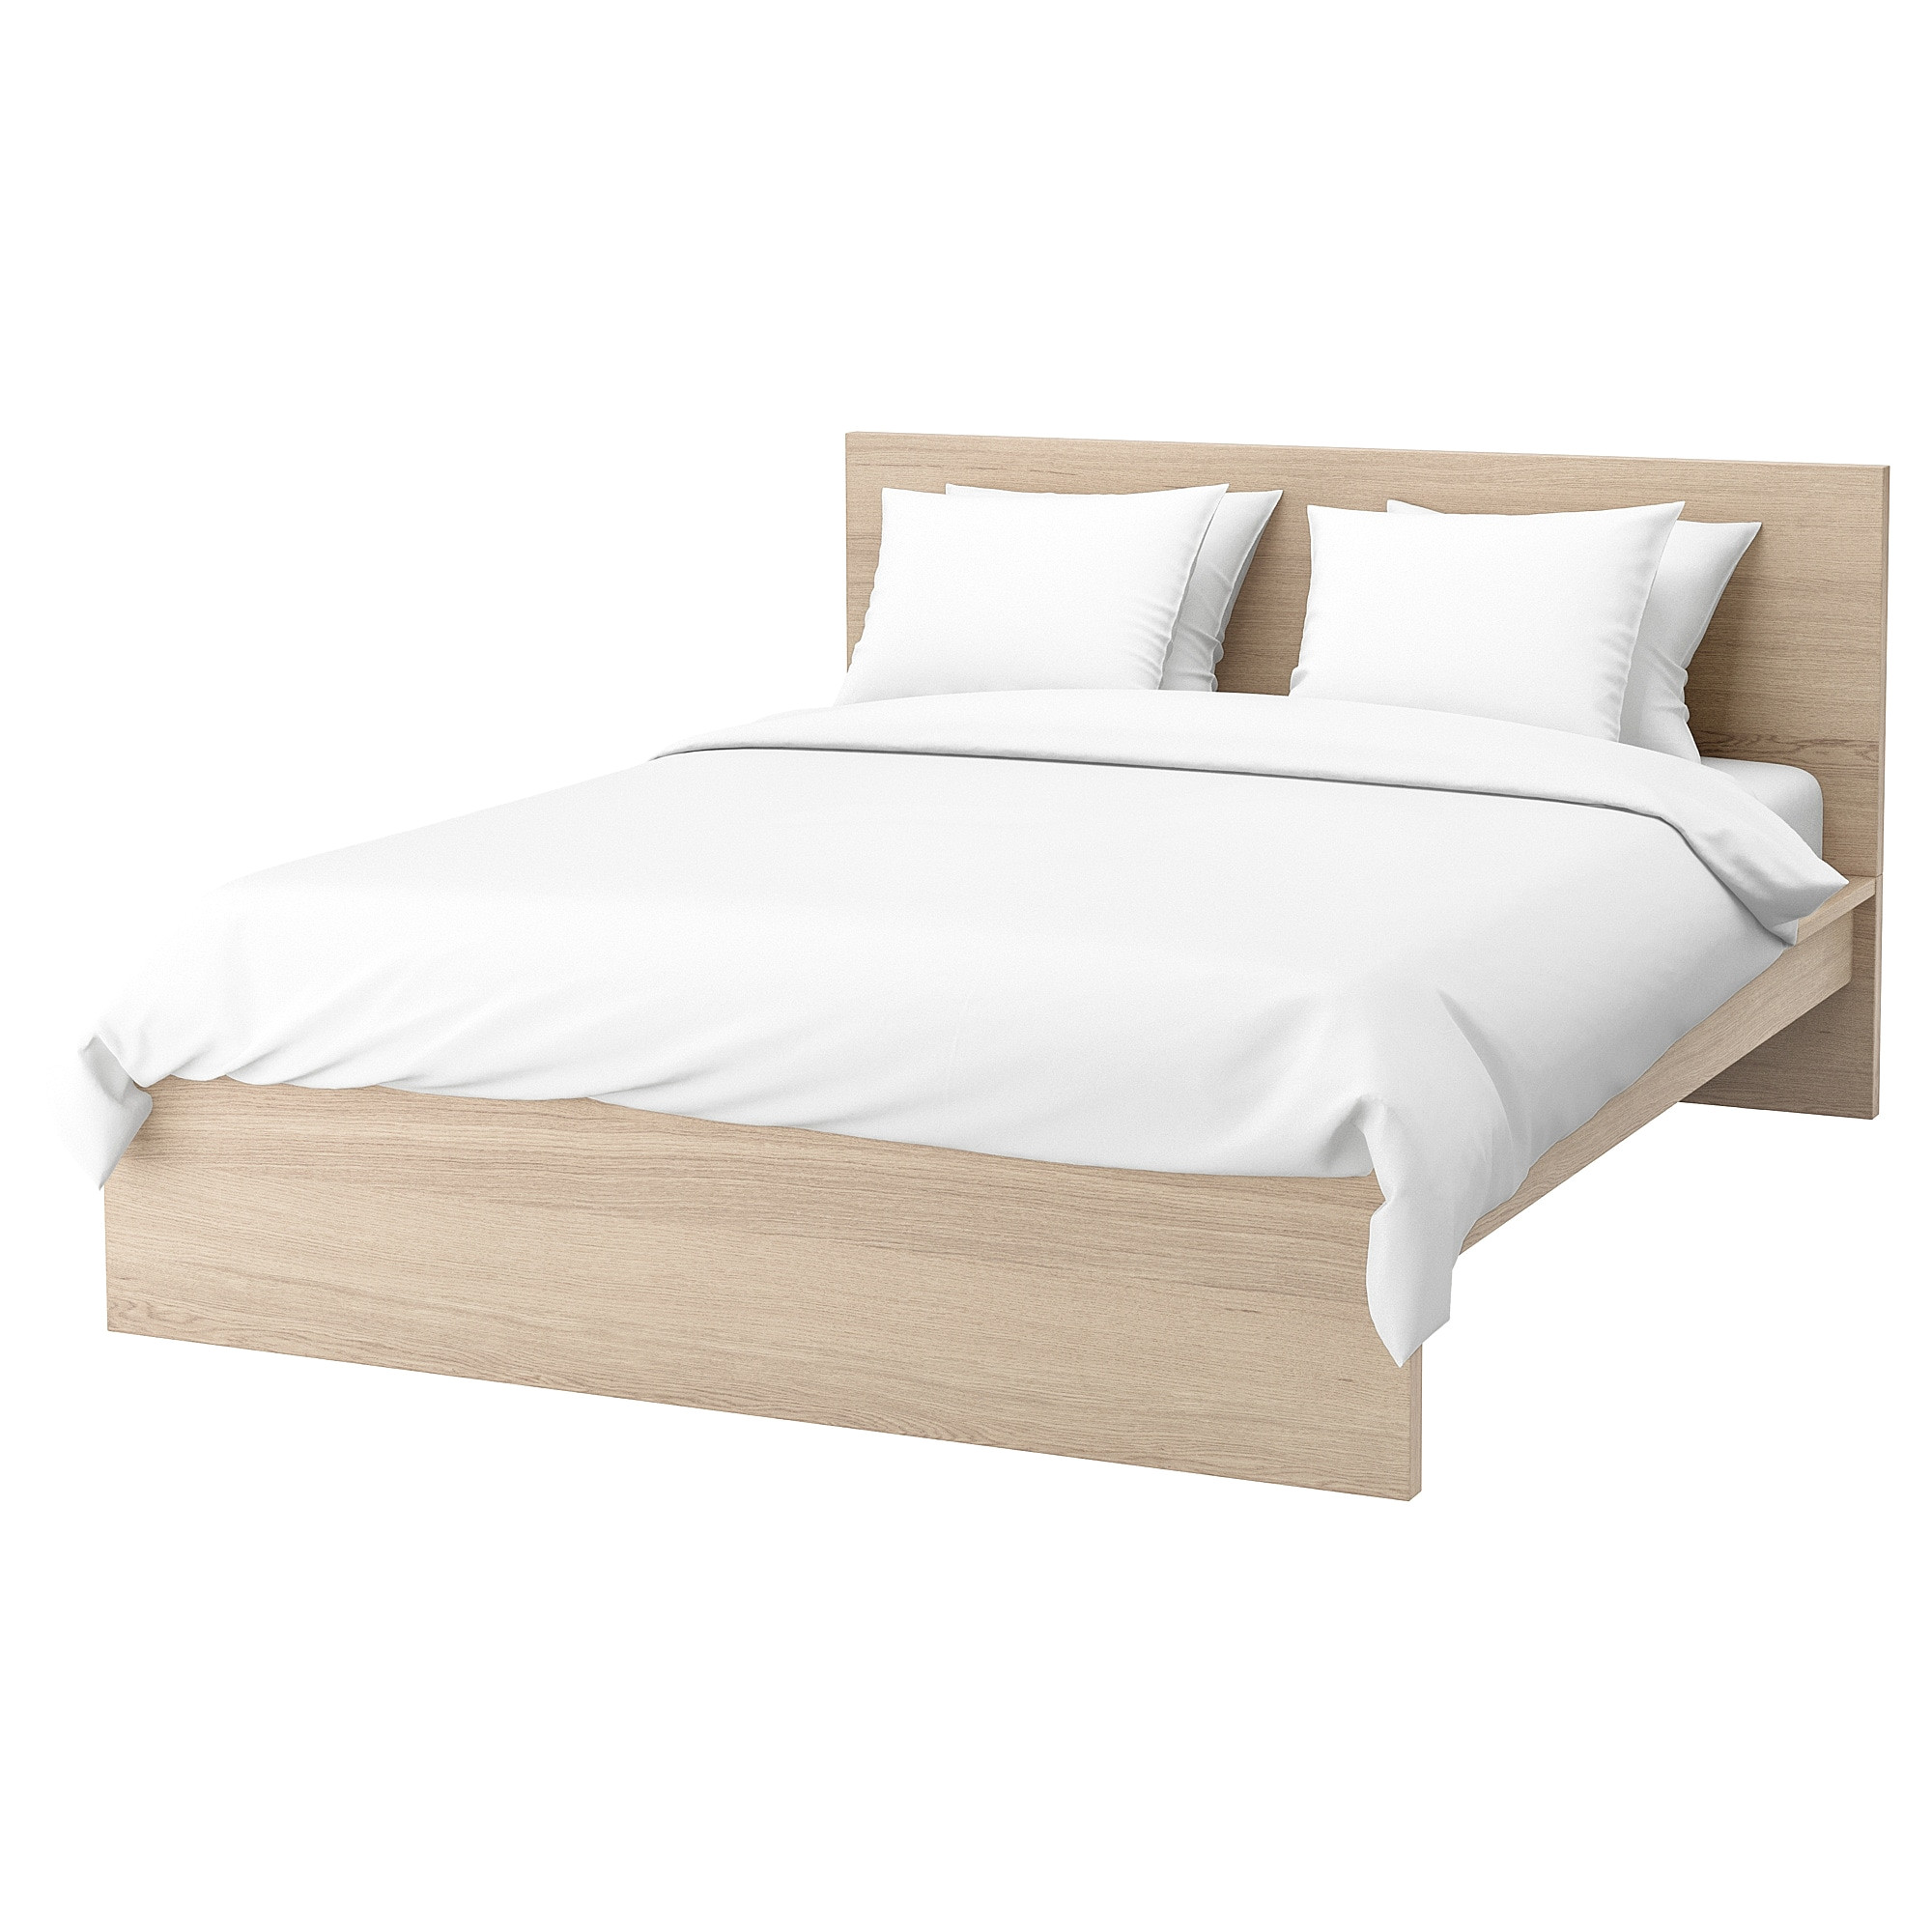 ikea malm bed frame high real wood veneer will make this bed age gracefully